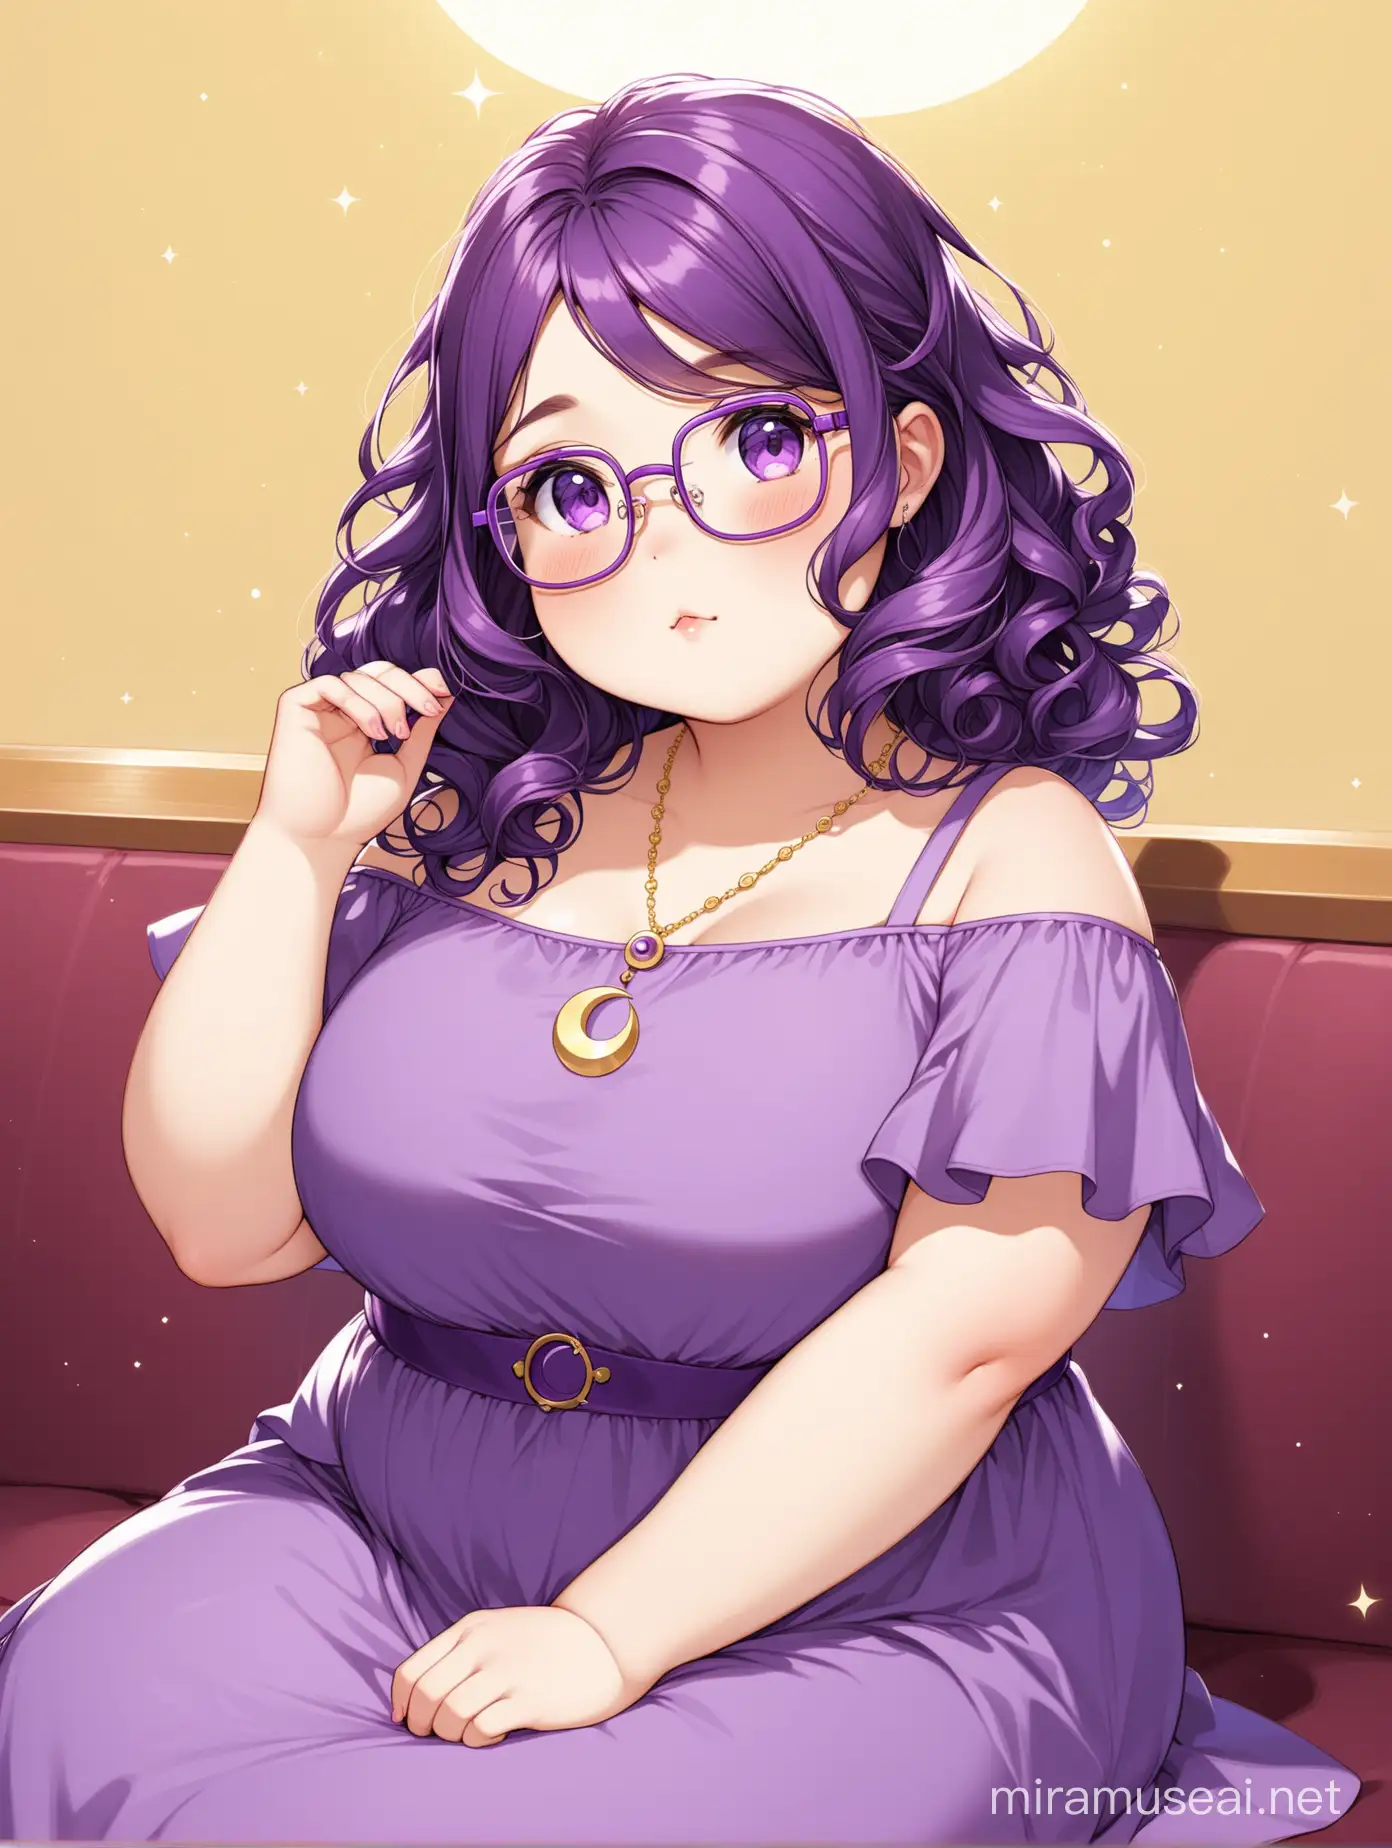 Cute, slightly chubby girl with square glasses, curly purple hair, wearing a purple dress and crescent noon necklace 